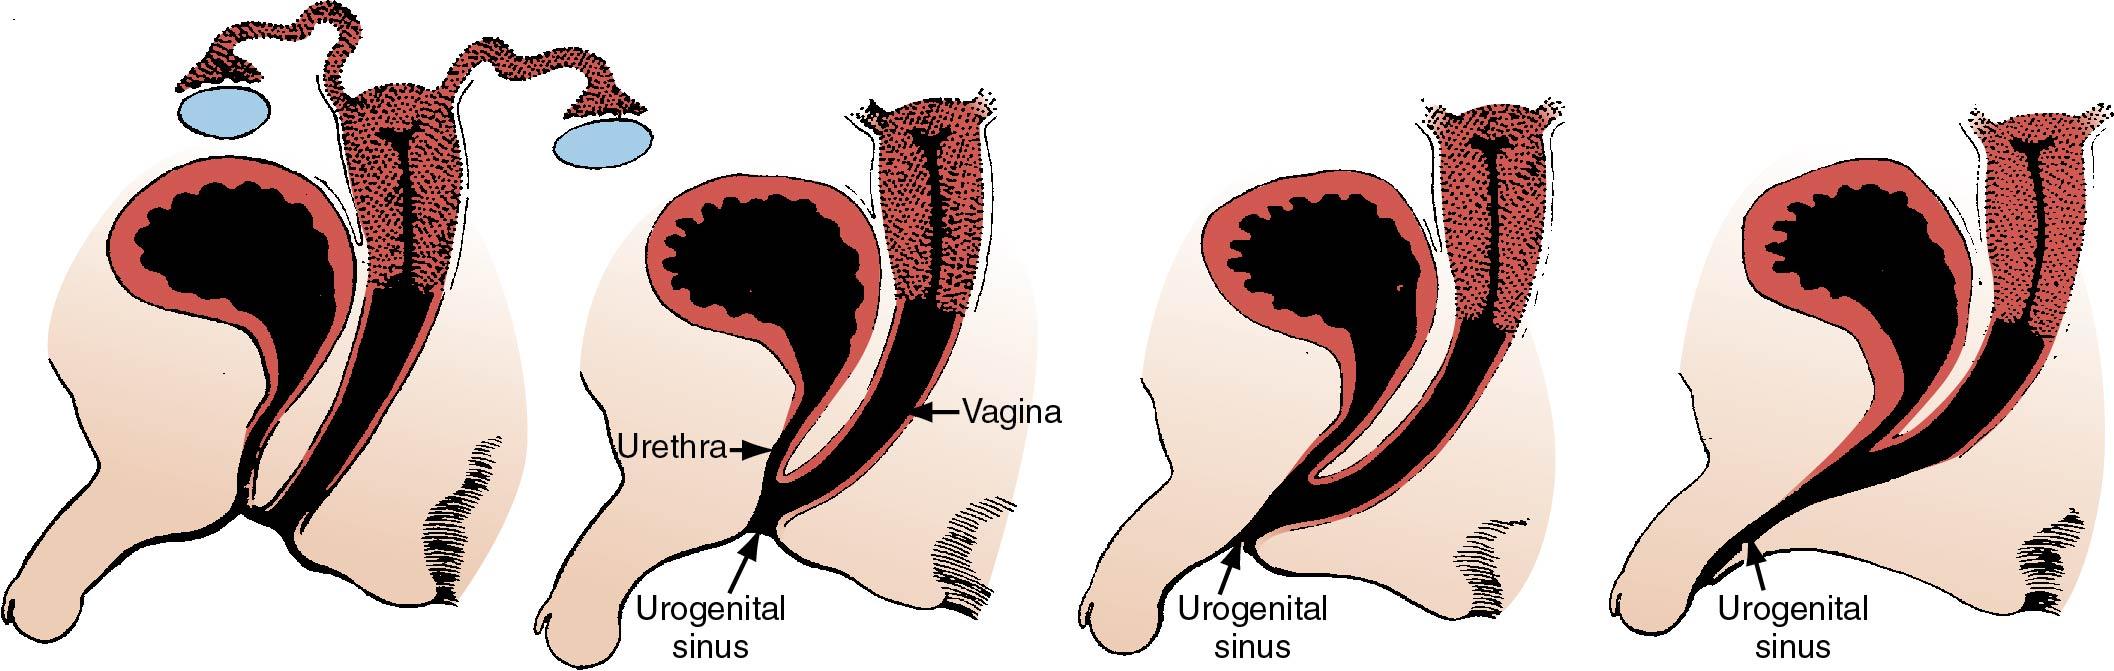 Fig. 11.1, Examples of 46,XX disorders of sexual development induced by prenatal exposure to androgens. Exposure after 12th fetal week leads only to clitoral hypertrophy (left). Exposure at progressively earlier stages of differentiation (from left to right) leads to retention of the urogenital sinus and labioscrotal fusion. If exposure occurs sufficiently early, the labia fuse to form a penile urethra.